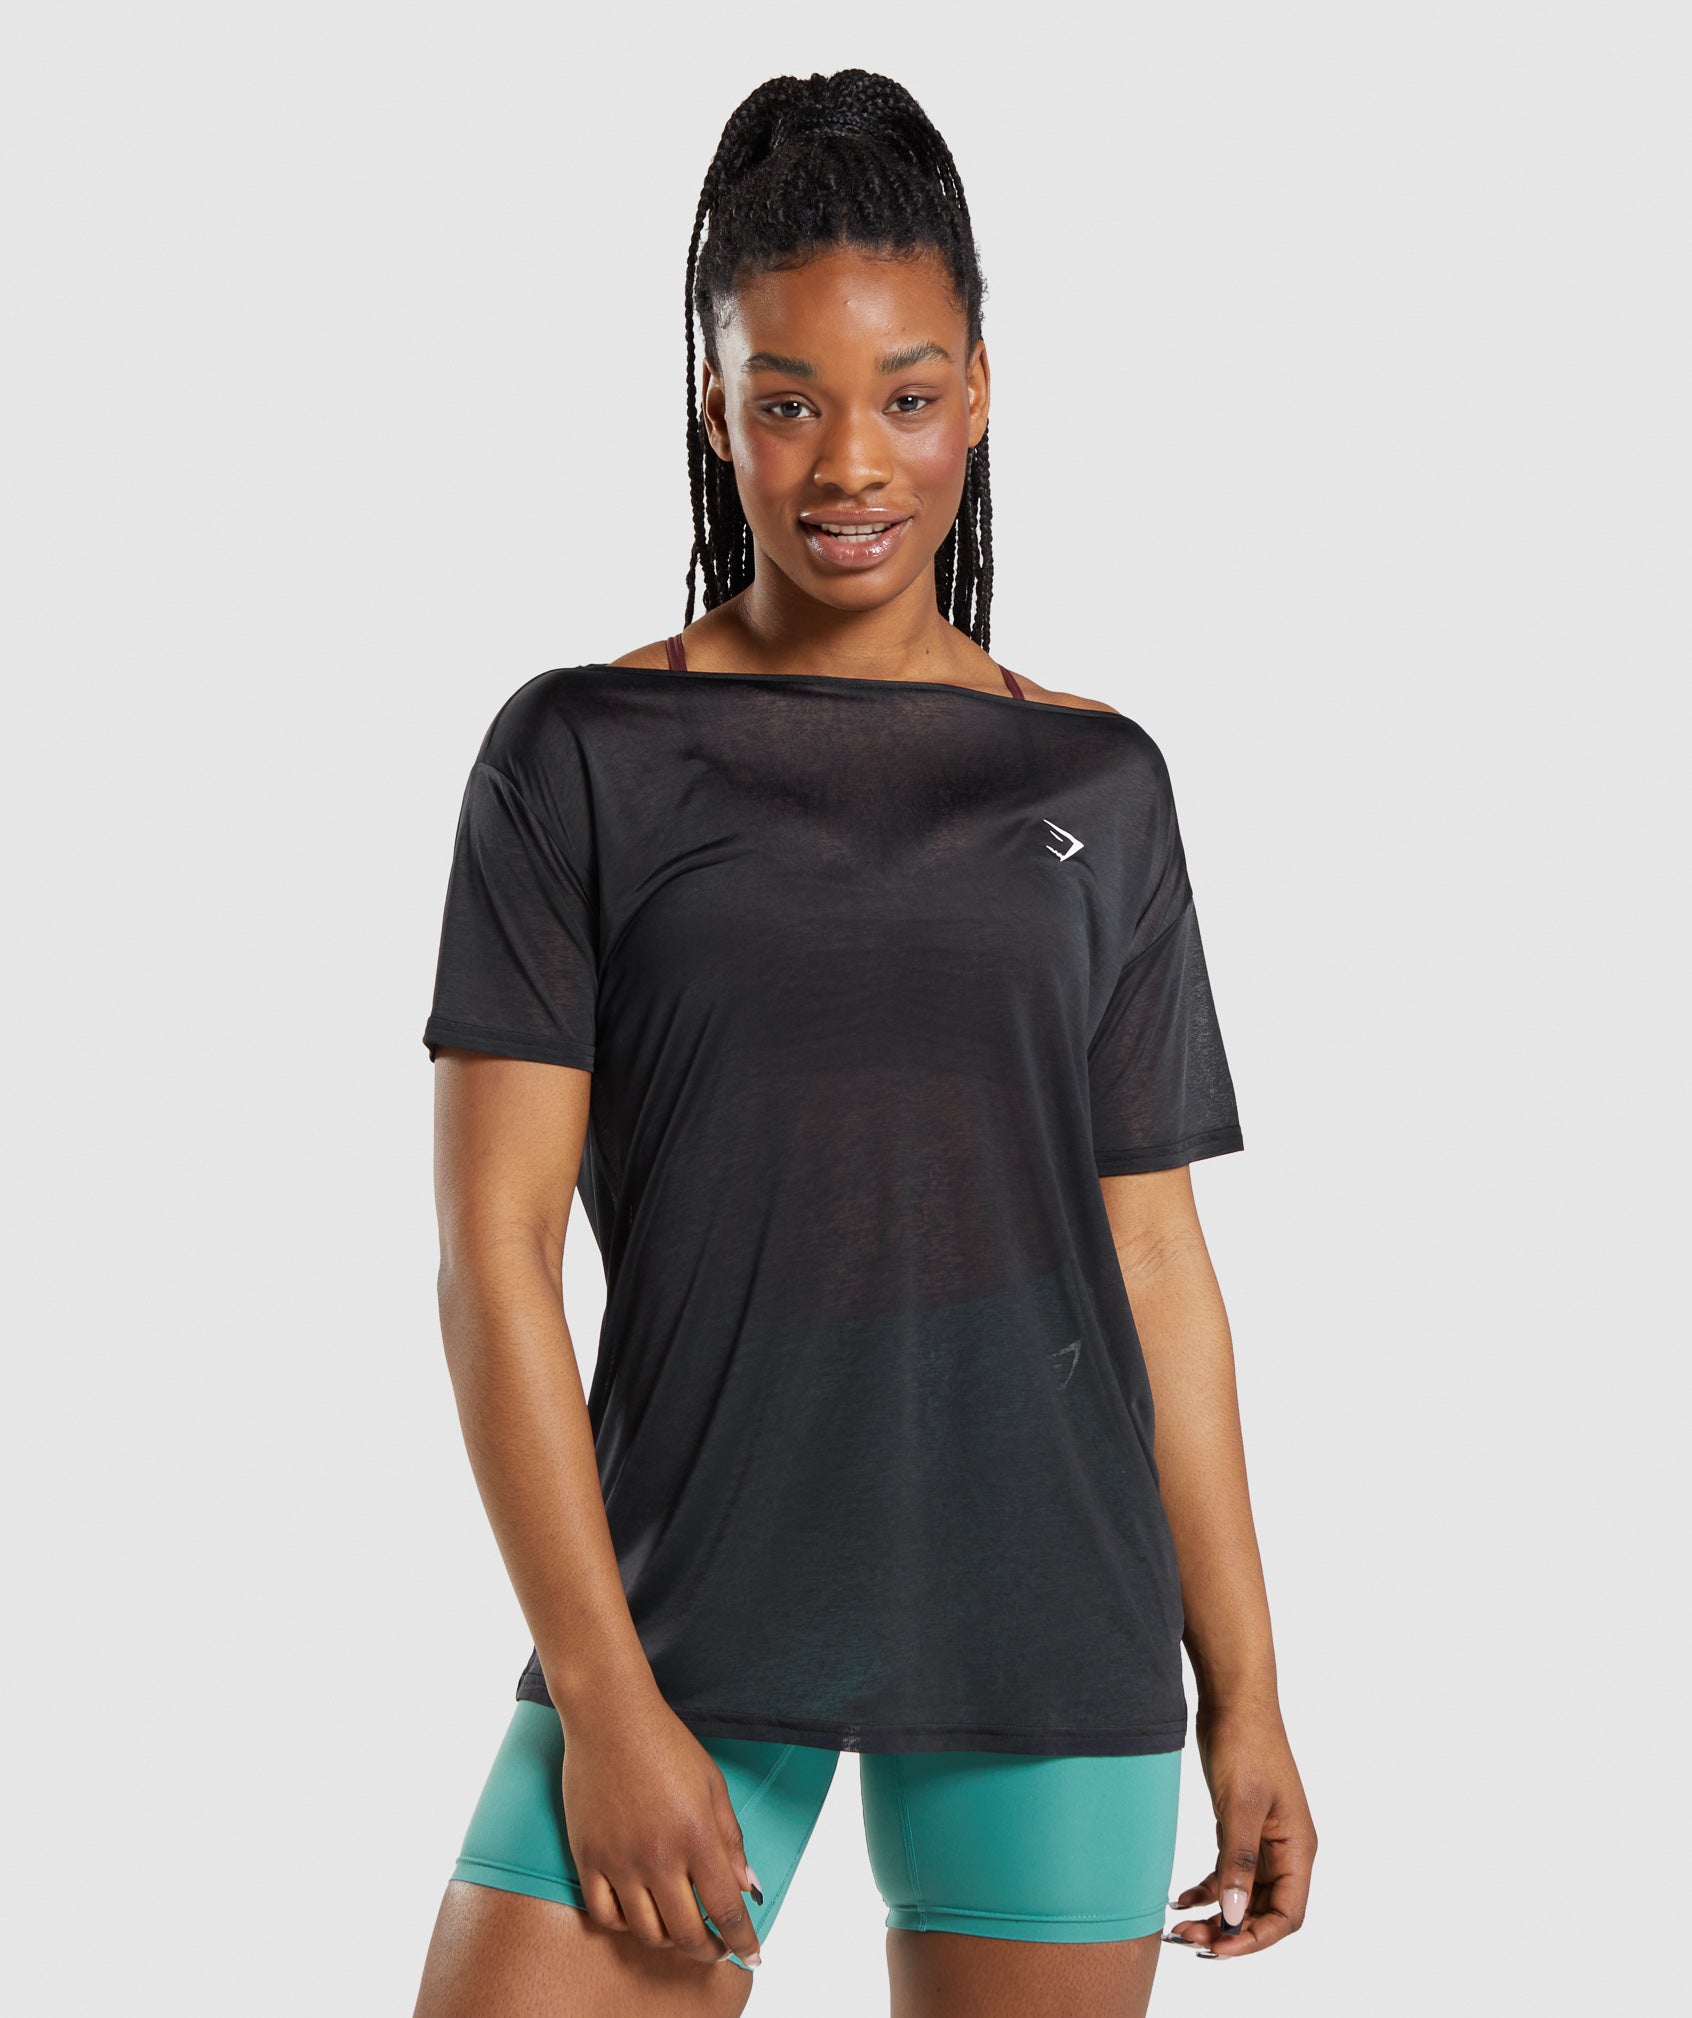 Training Oversized Top in Black - view 1